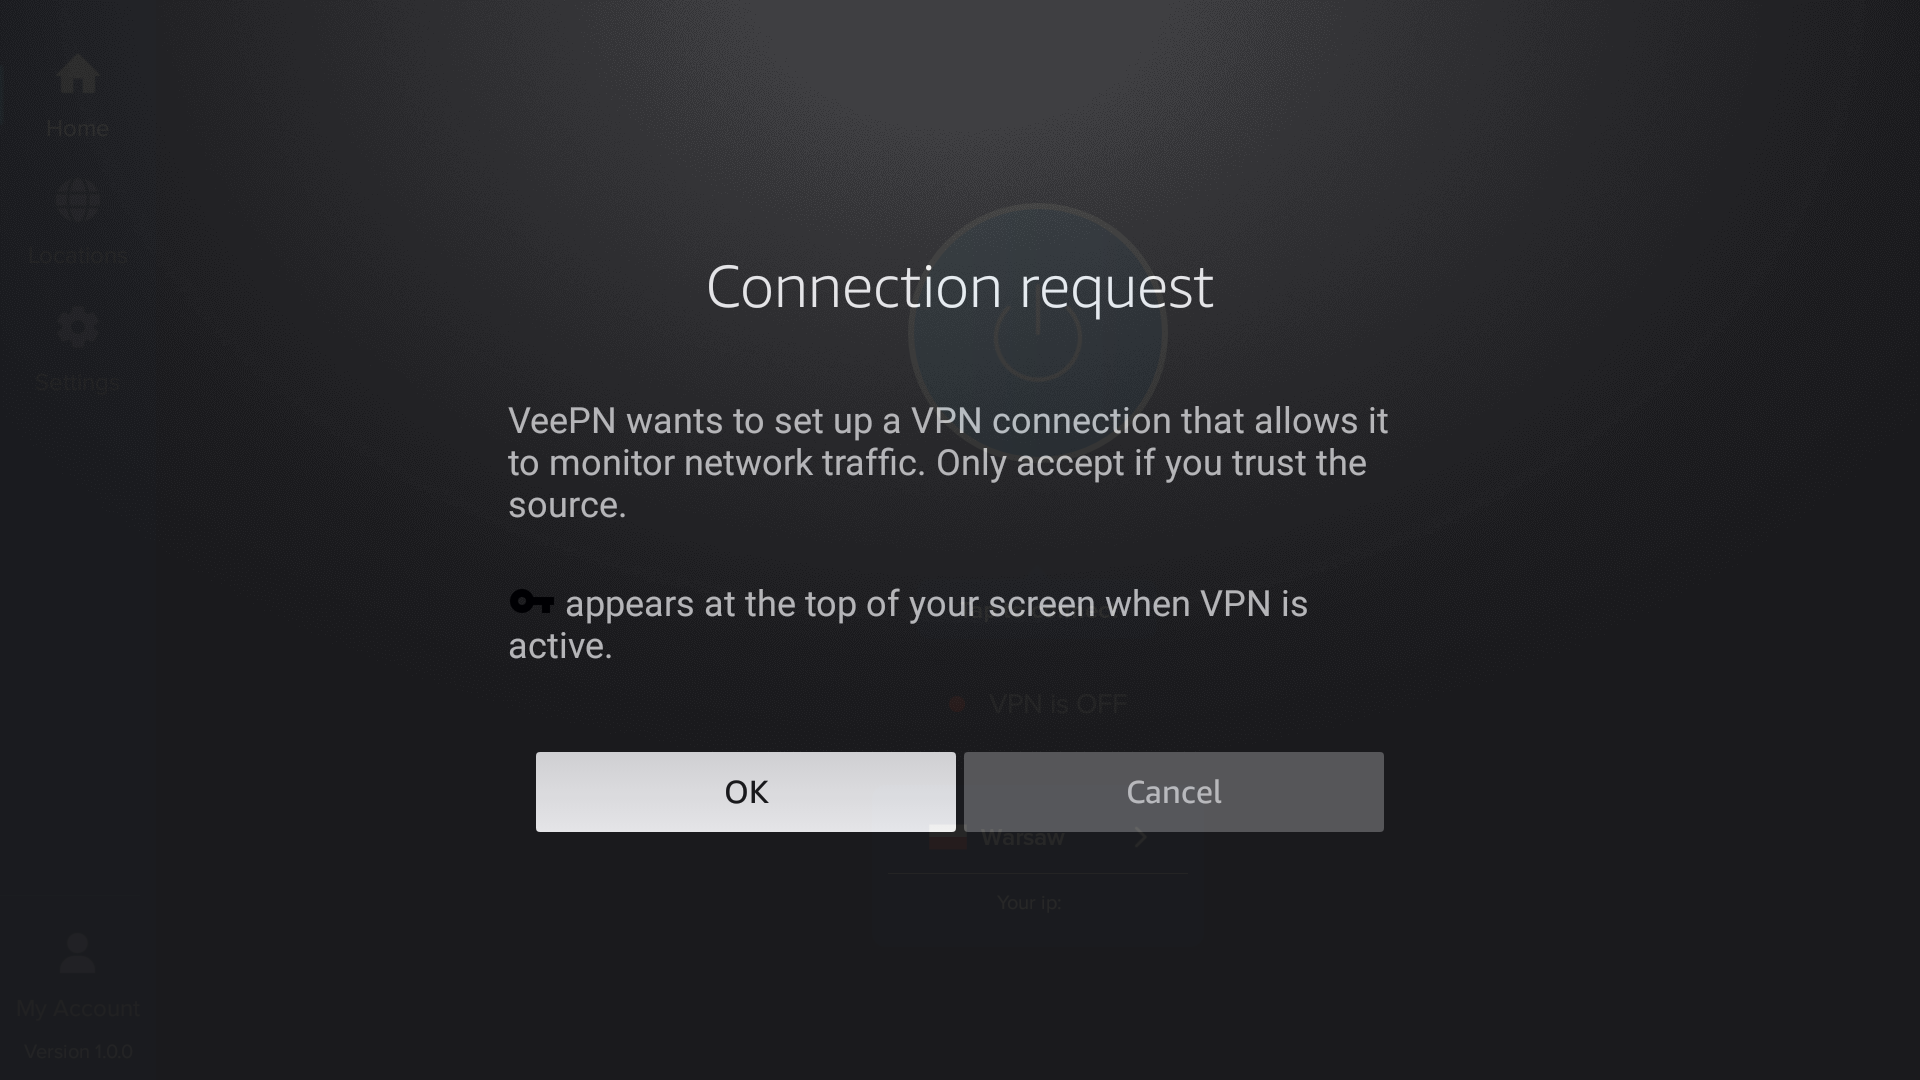 Click OK to enable VeePN connection